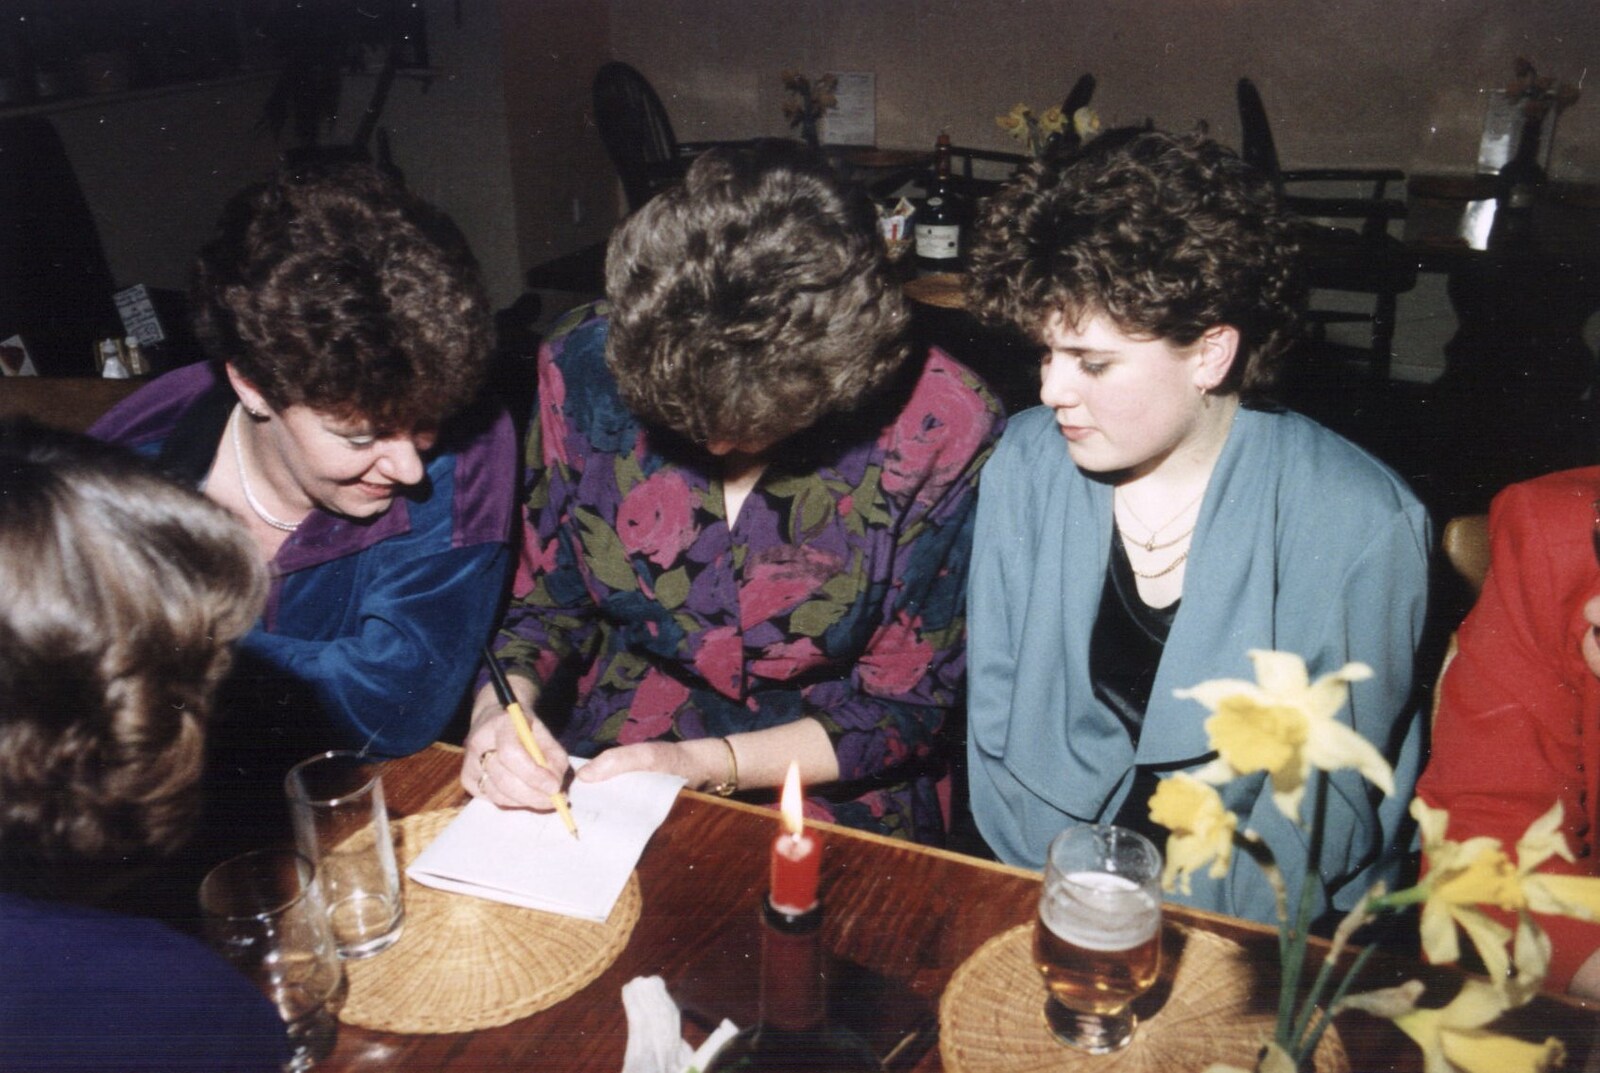 BPCC Printec Reunion at The Brome Swan, Suffolk - 20th February 1991: Crispy, Pam and Kelly huddle around and write secret stuff